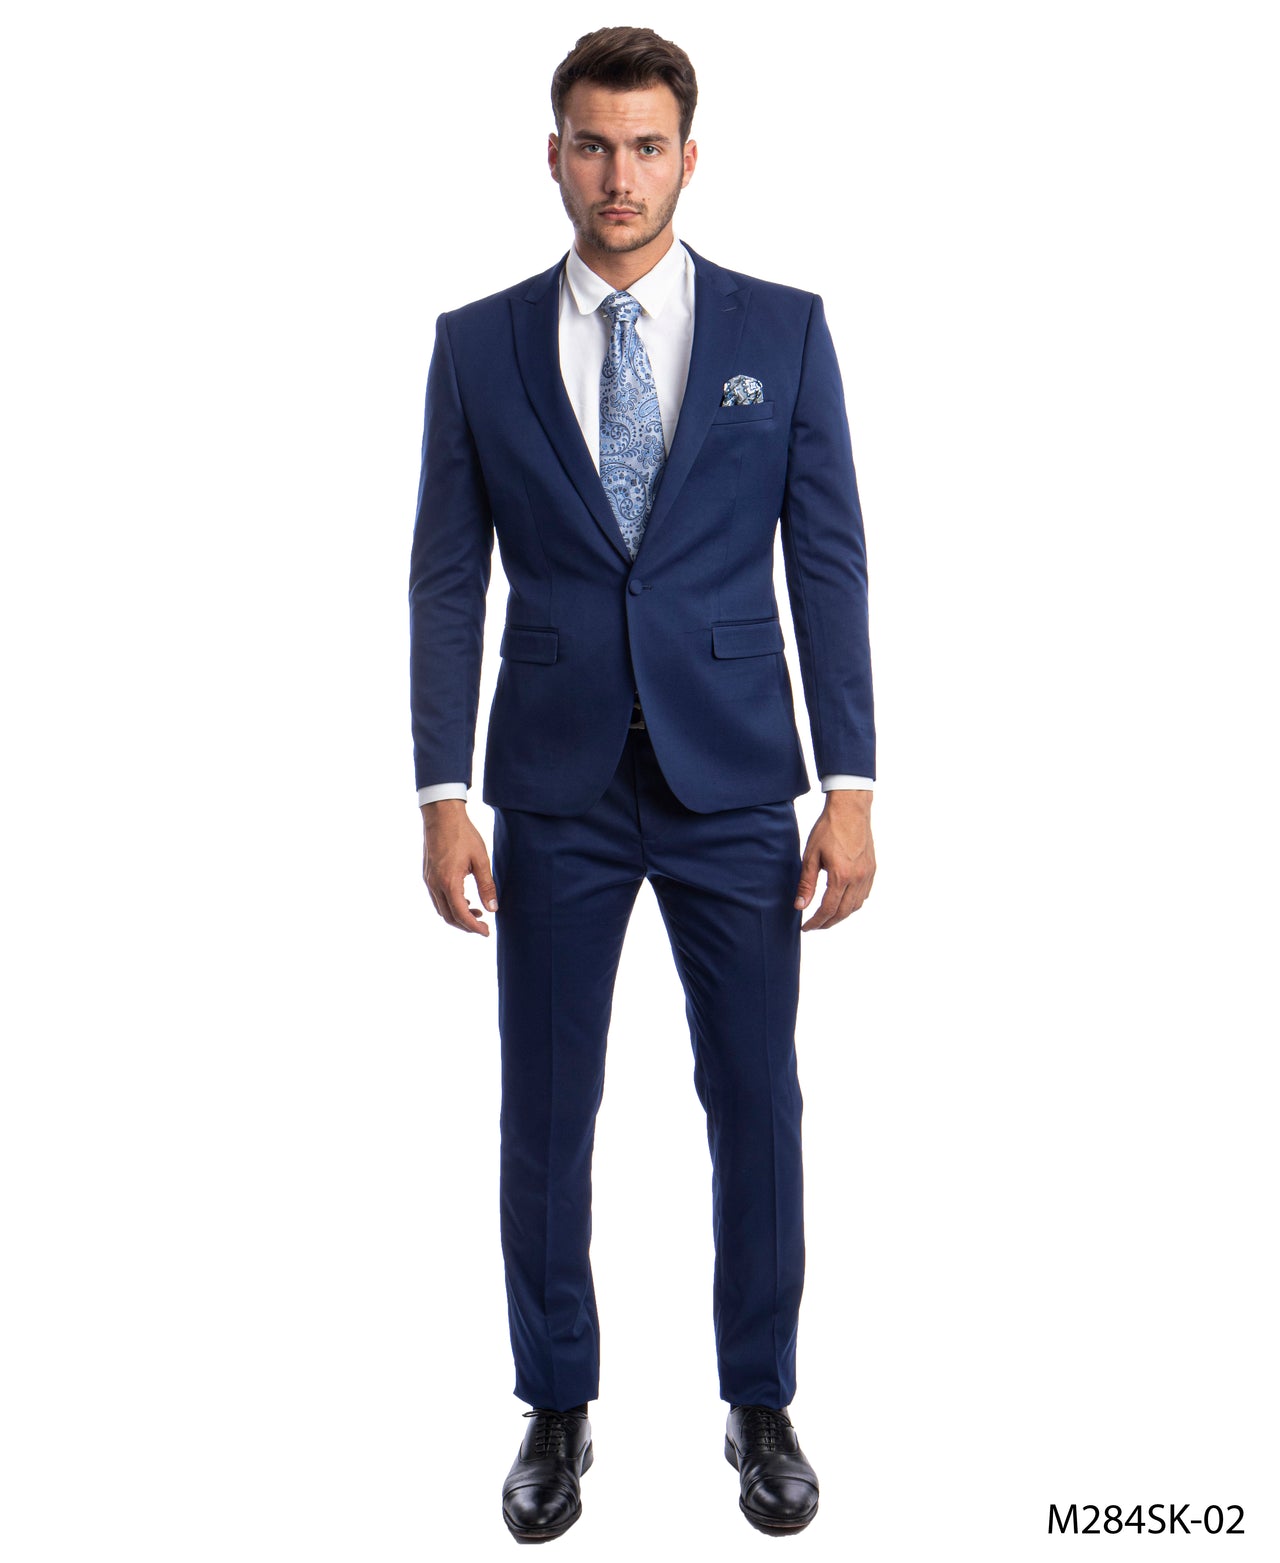 Dk.Blue Suit For Men Formal Suits For All Ocassions - Hattitude